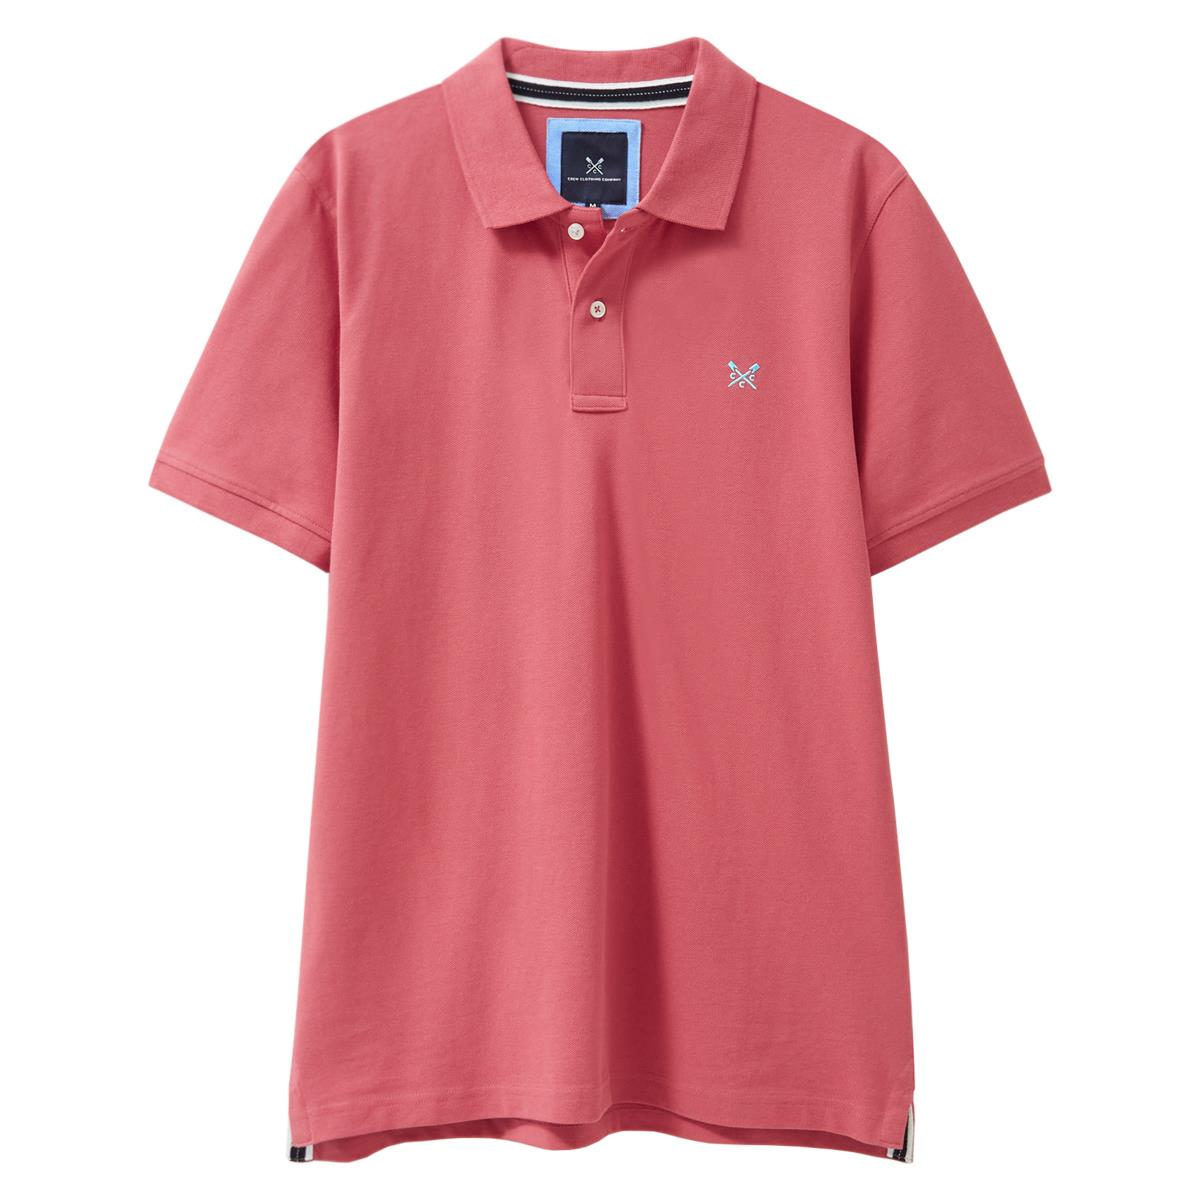 What are the features of the Crew Clothing men's pique polo?